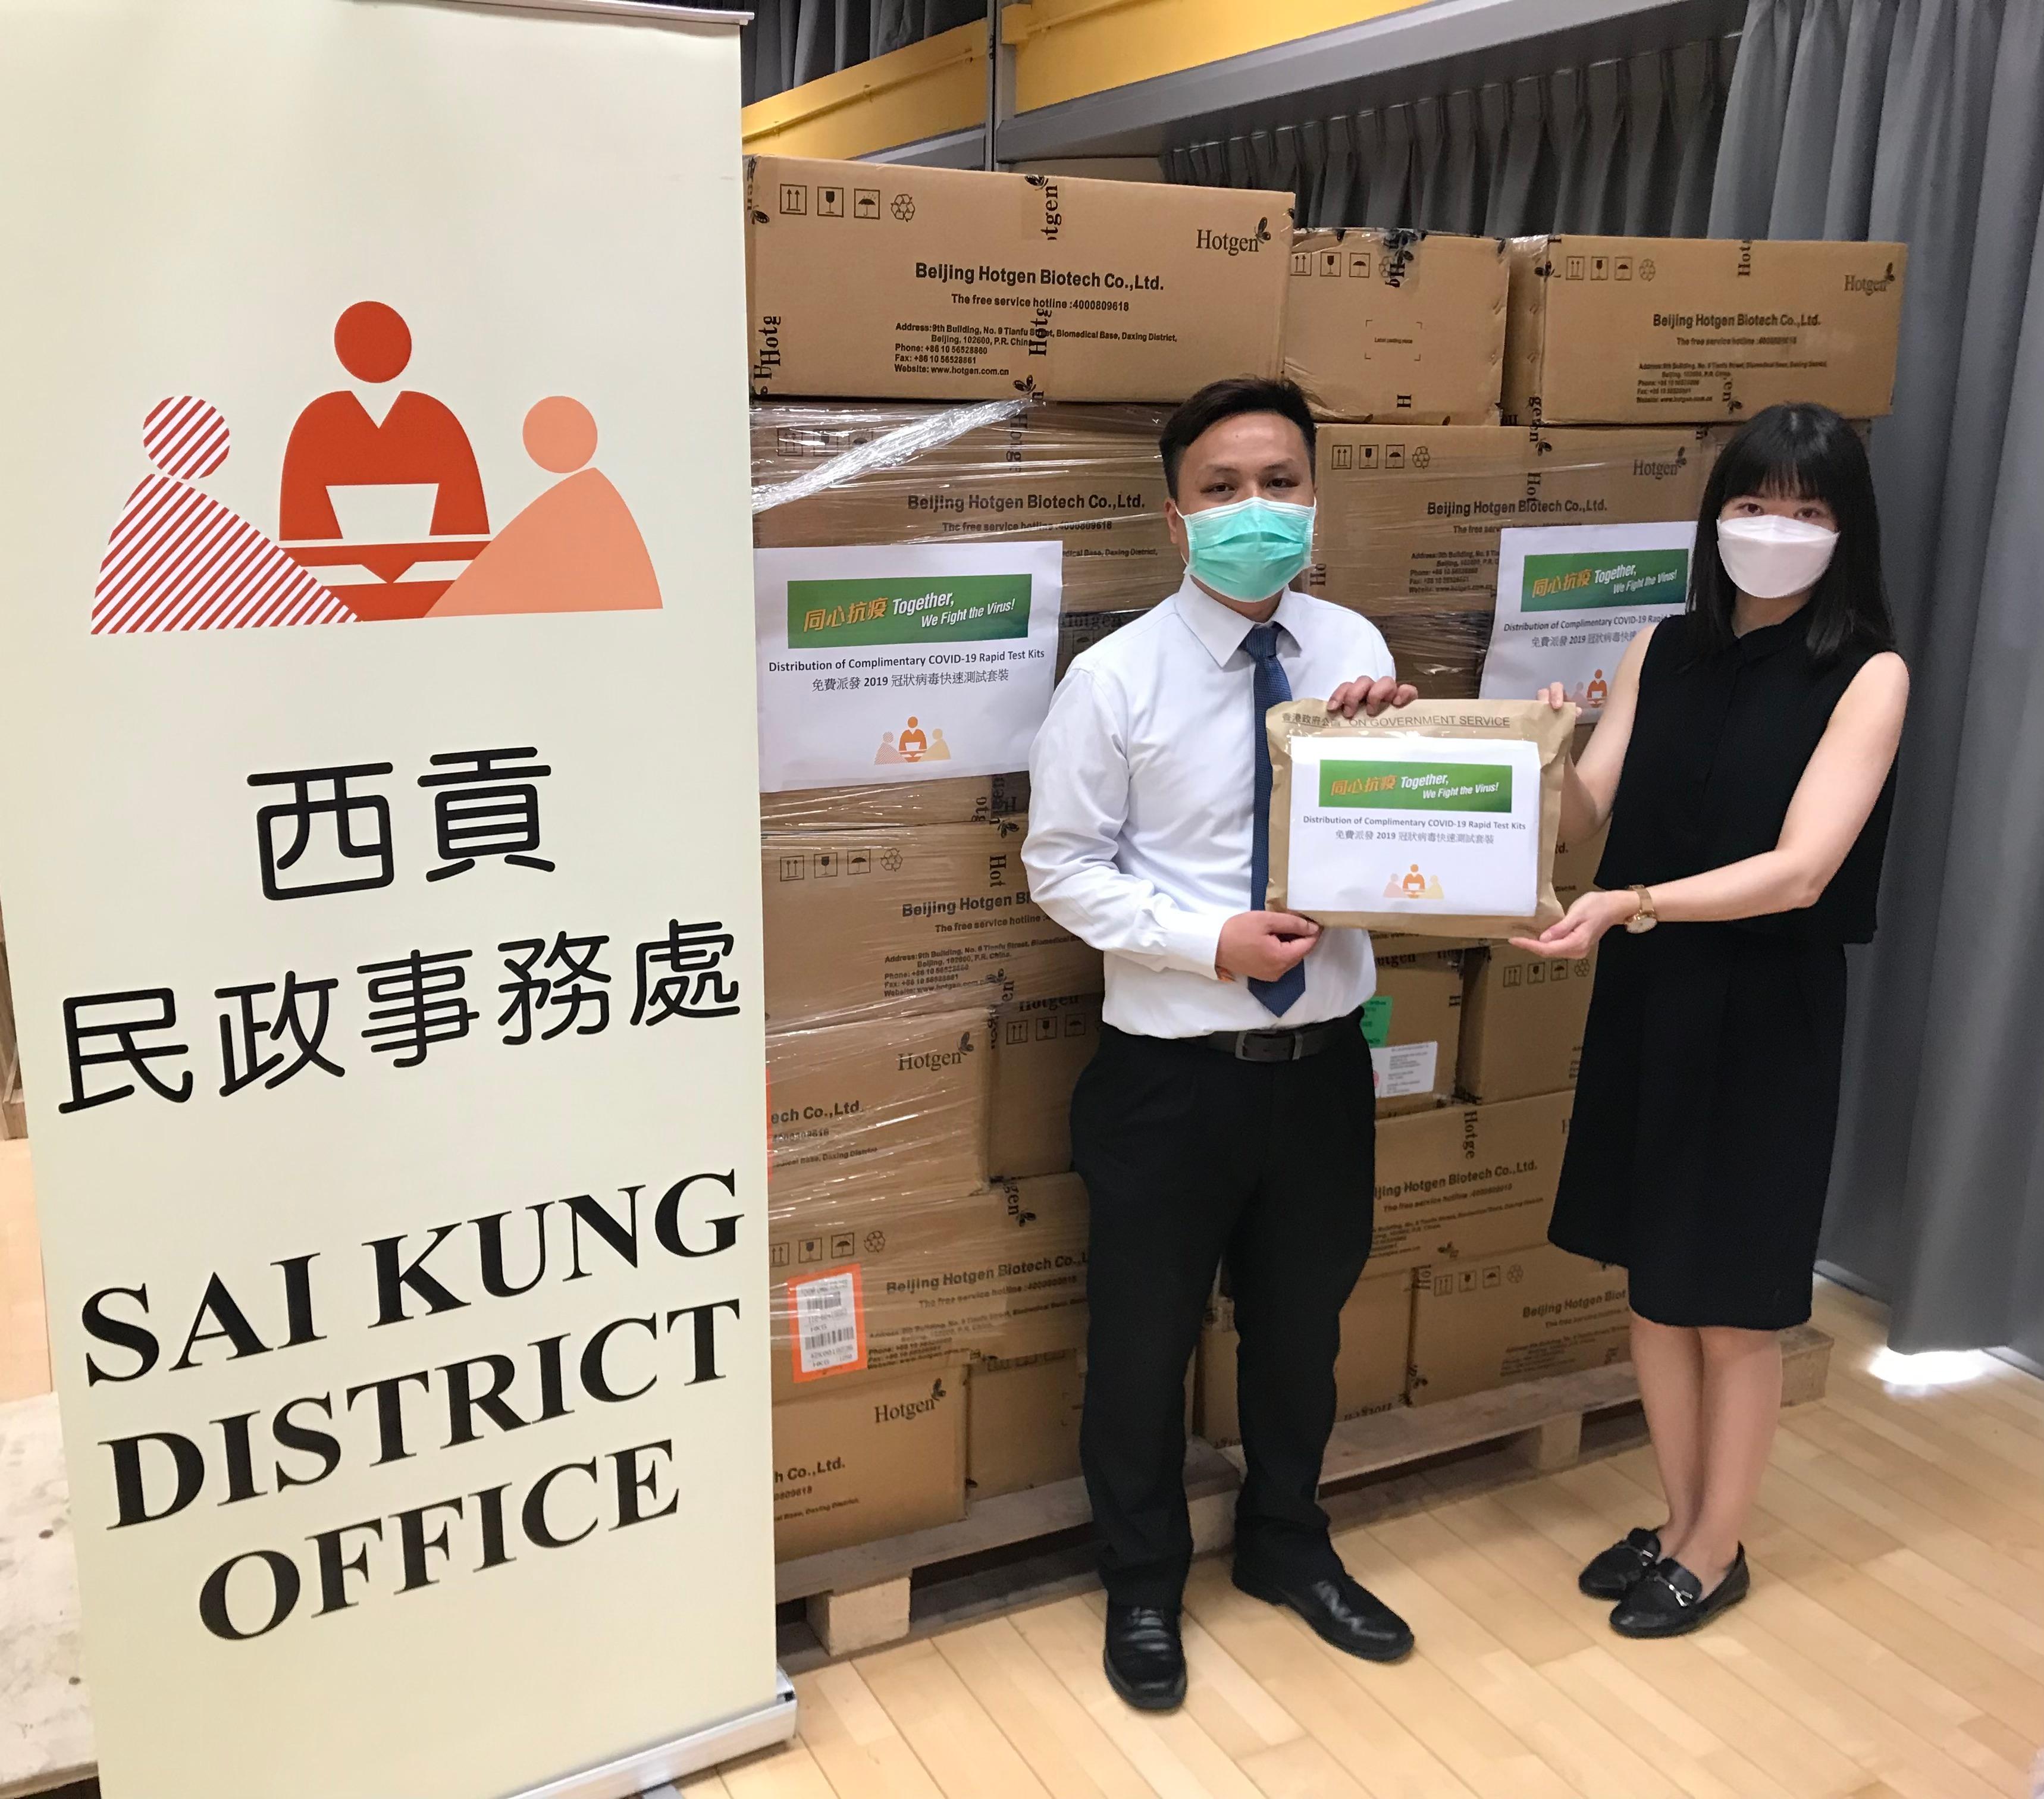 The Sai Kung District Office distributed COVID-19 rapid test kits to households, cleansing workers and property management staff living and working in Monterey for voluntary testing through the property management company.